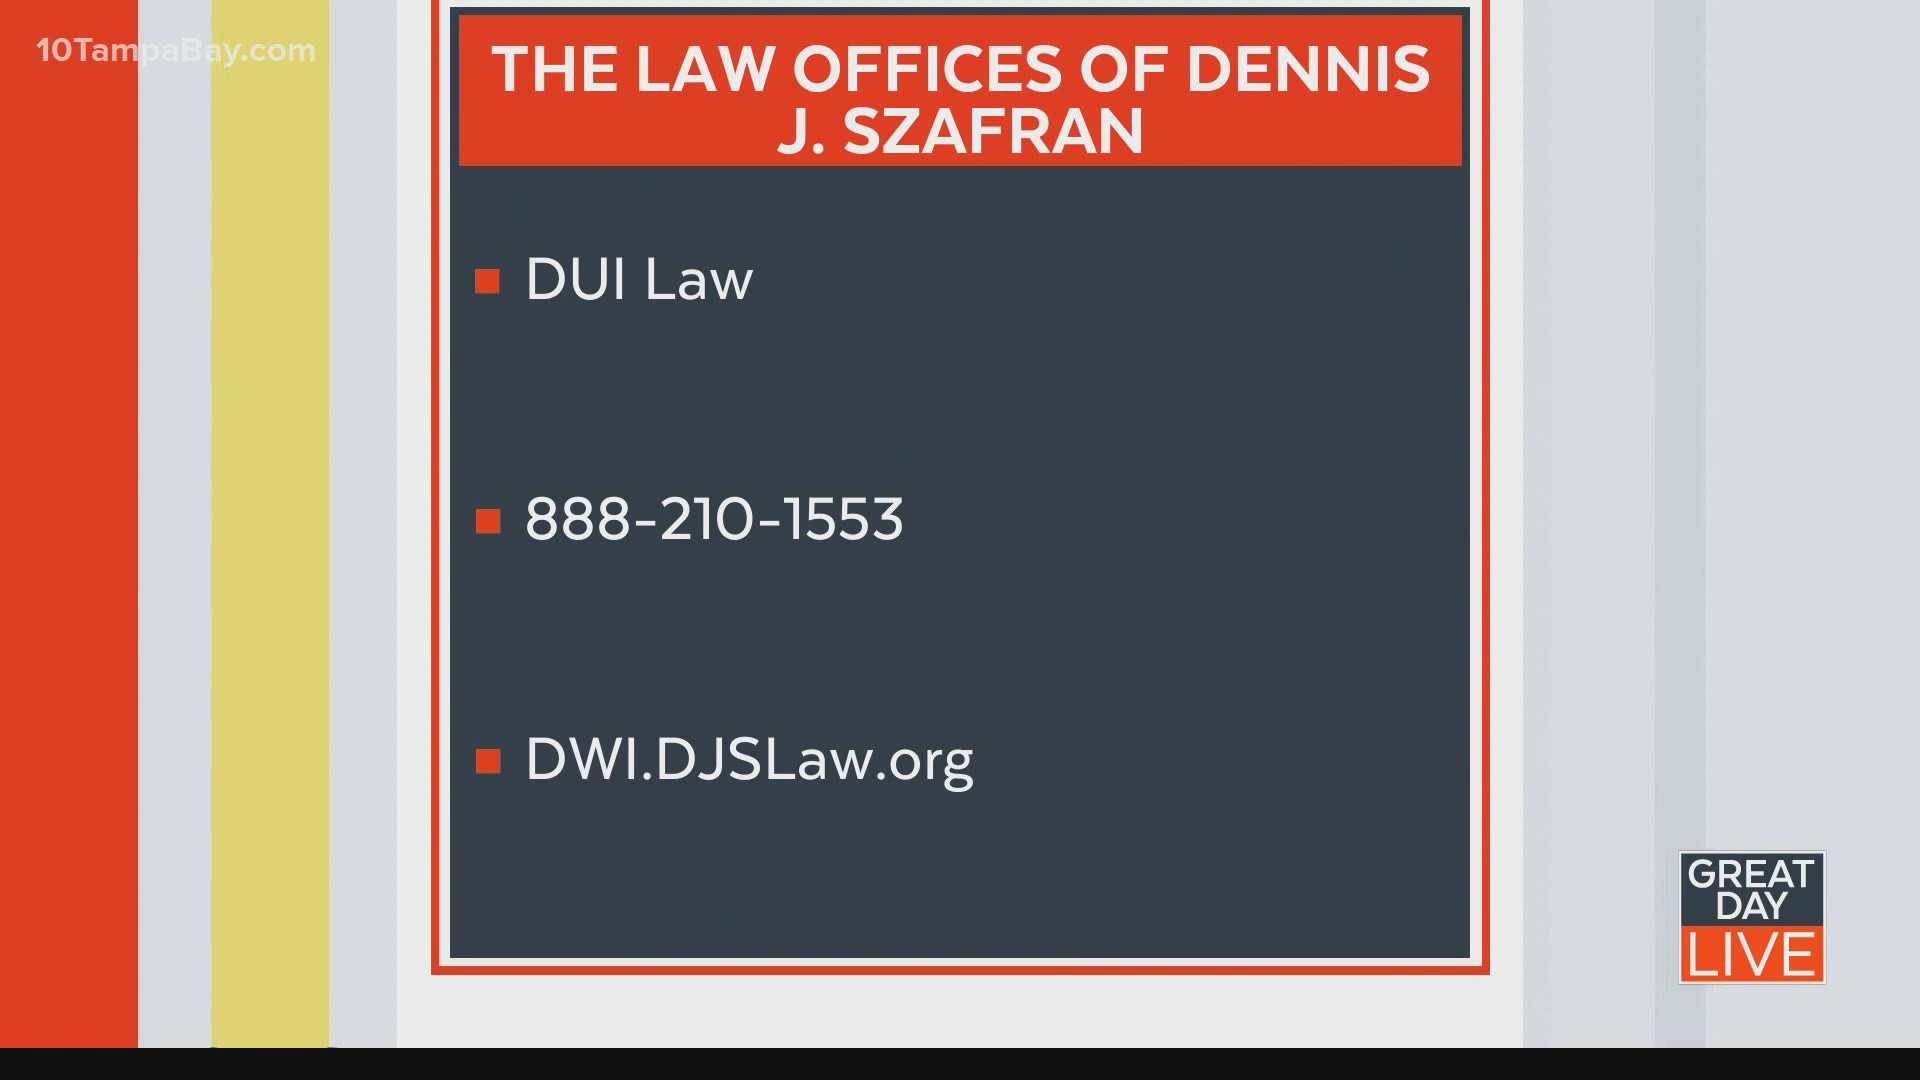 Paid content sponsored by The Law Offices of Dennis J. Szafran